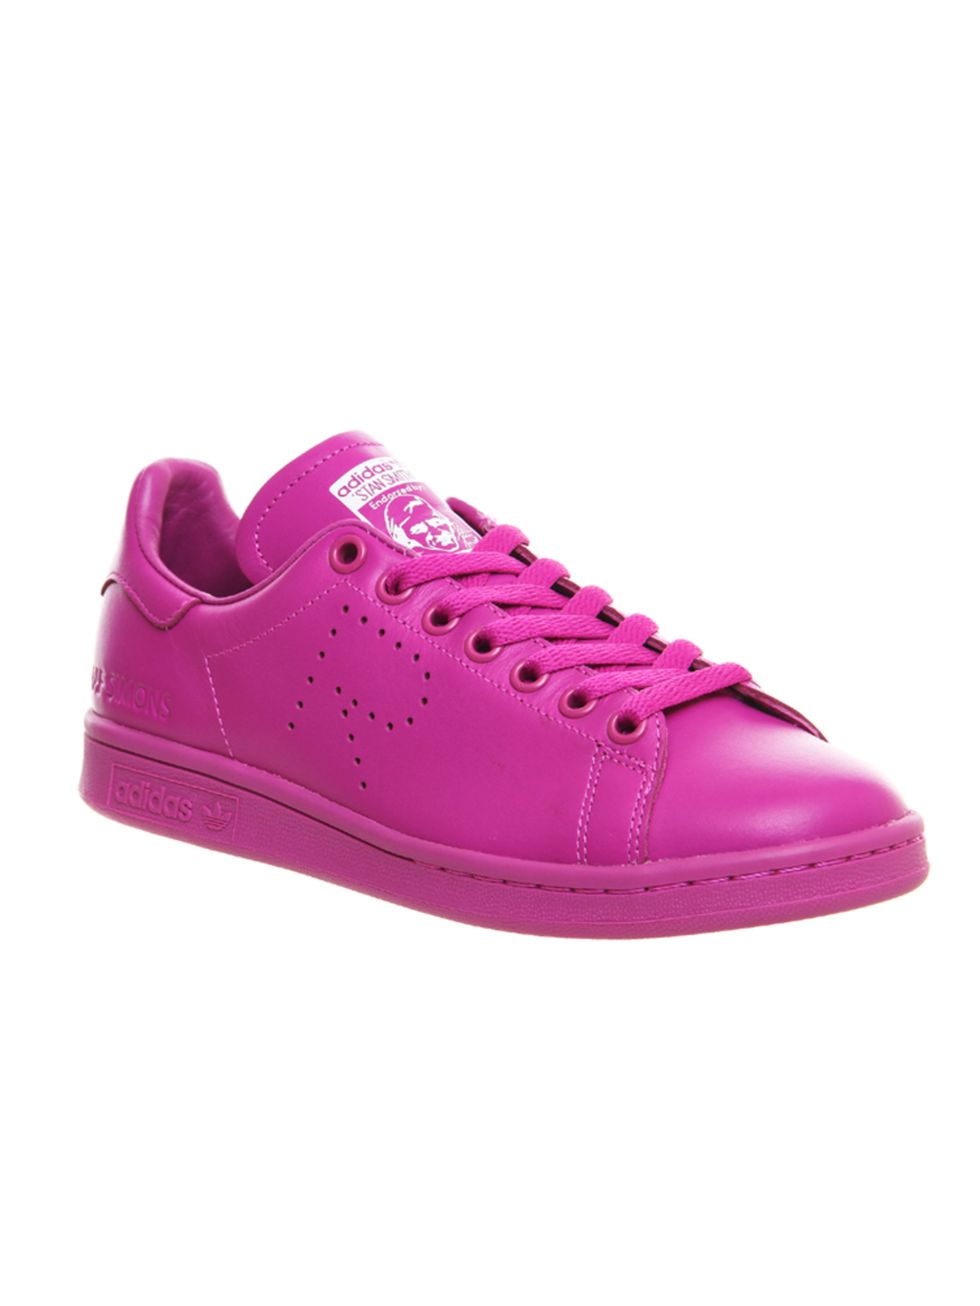 <p>Adidas Raf Simons Trainers, £225 at <a href="http://www.offspring.co.uk/view/product/offspring_catalog/5,21/1758376247" target="_blank">offspring.co.uk </a></p>